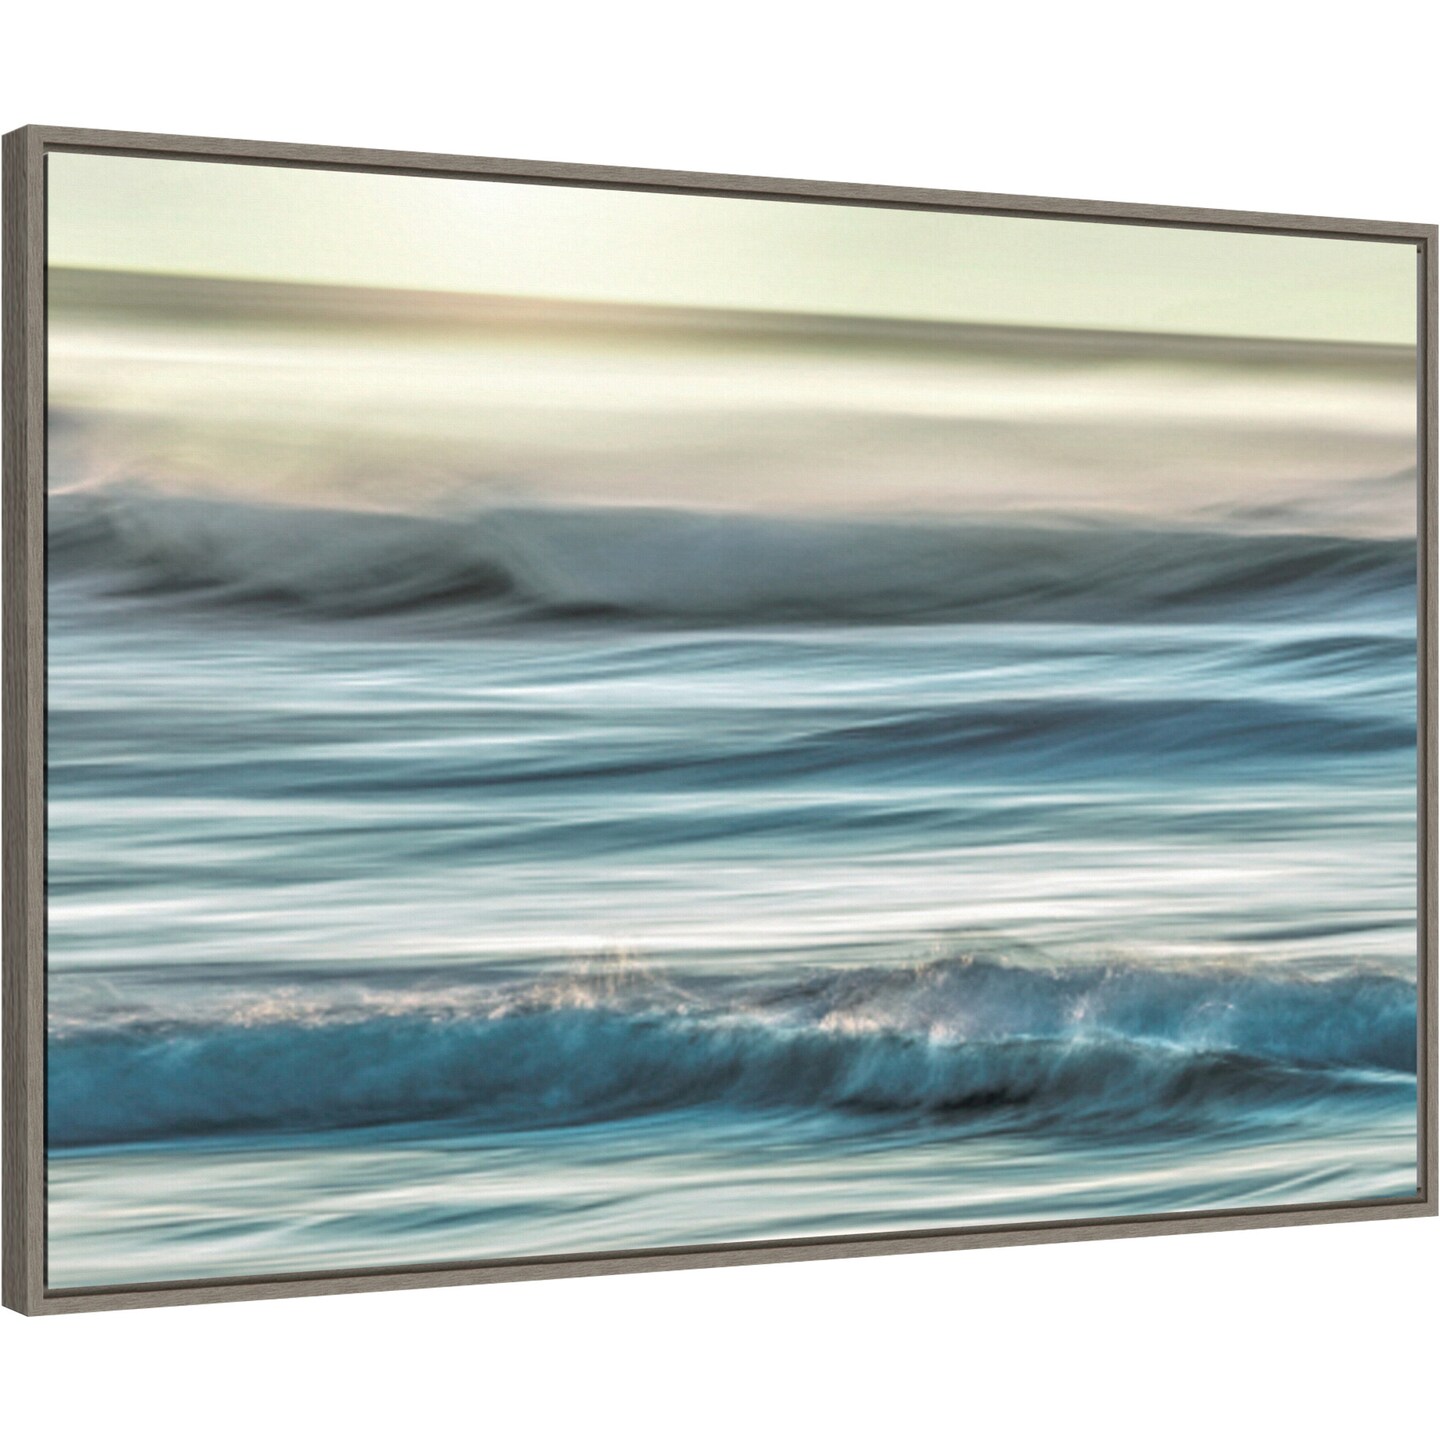 Motion blur of sunset on coast by Don Paulson Danita Delimont 33-in. W x 23-in. H. Canvas Wall Art Print Framed in Grey